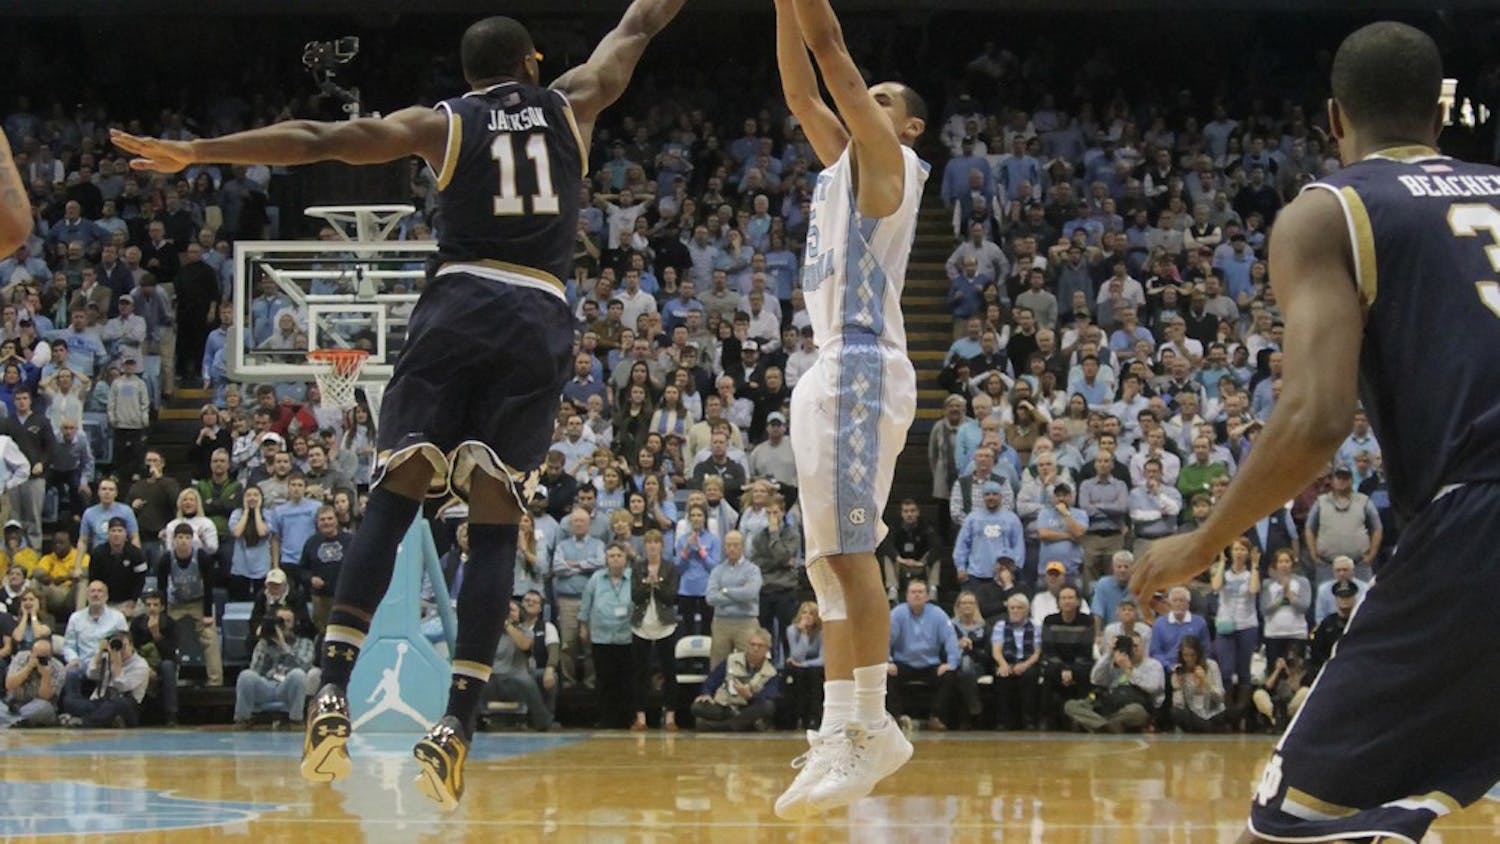 The UNC men's basketball team lost to Notre Dame 71 to 70 Monday in the Smith Center.